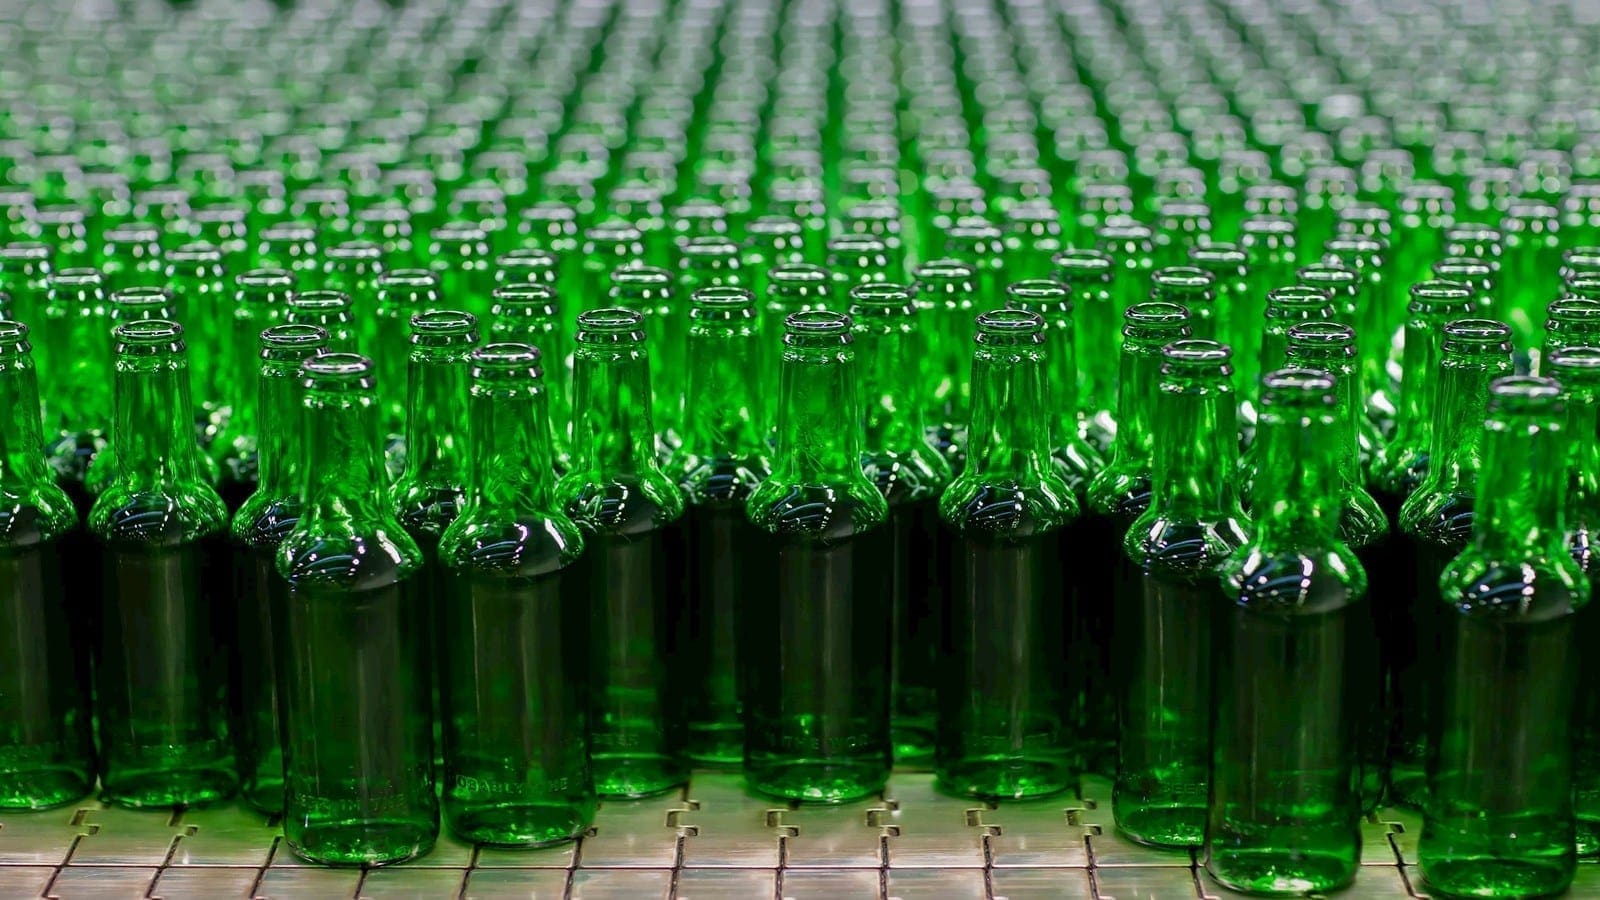 Carlsberg Marston’s debuts new glass bottles with up to 90% less carbon impact